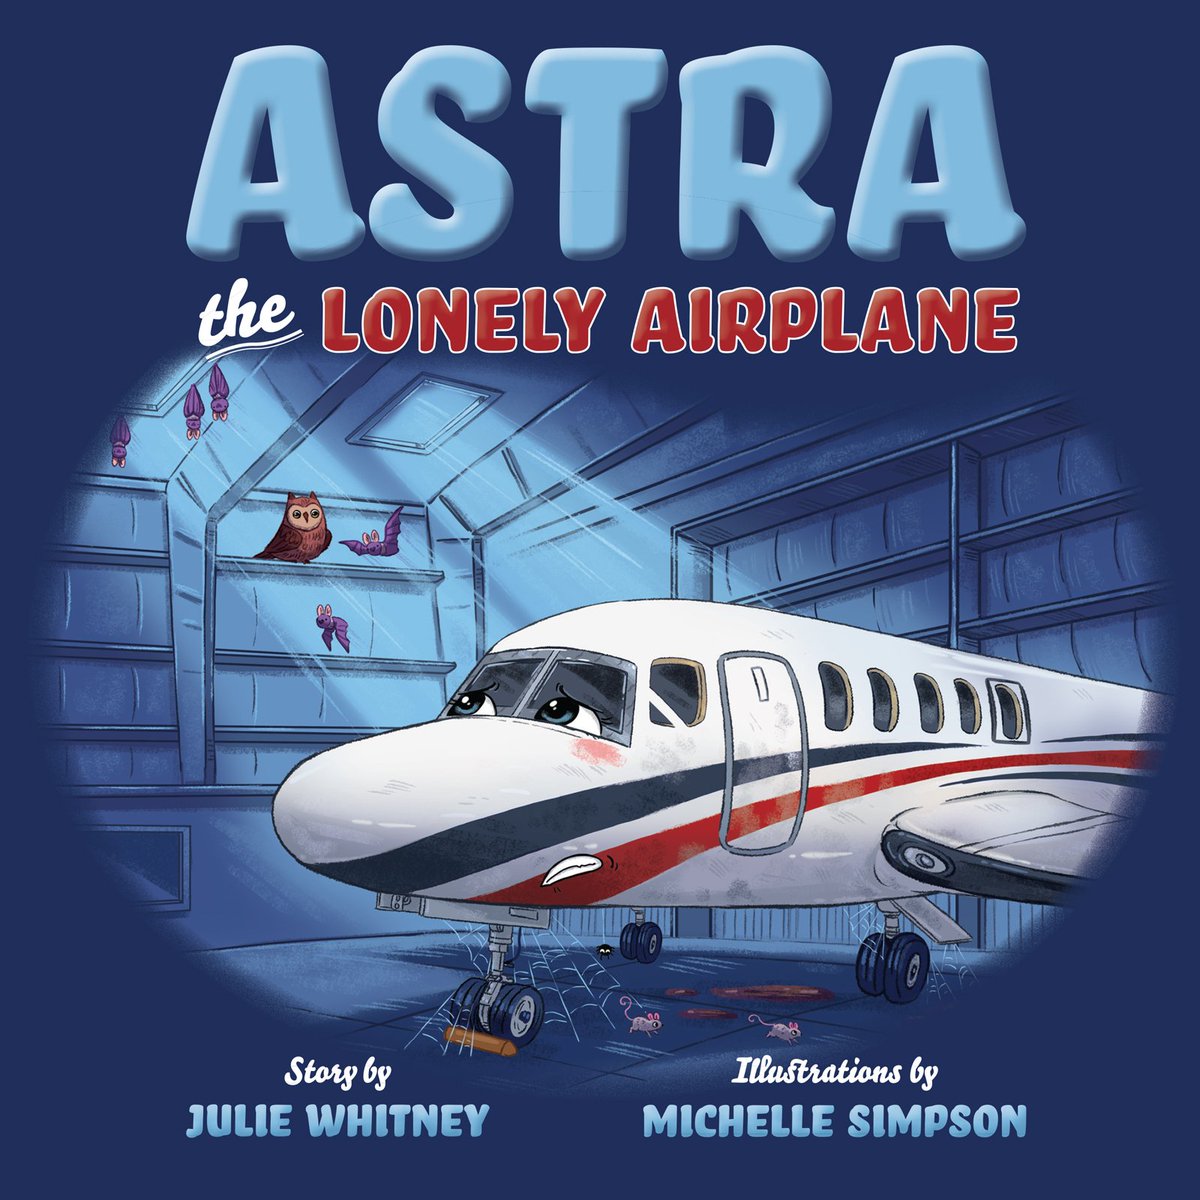 This book is being released in March 2022 and is available for pre-order now. The story includes facts about the plane and it captures you and you become emotionally involved. If you know a plane lover it is a perfect gift.

#astrathelonelyairplane #juliewhitney #michellesimpson